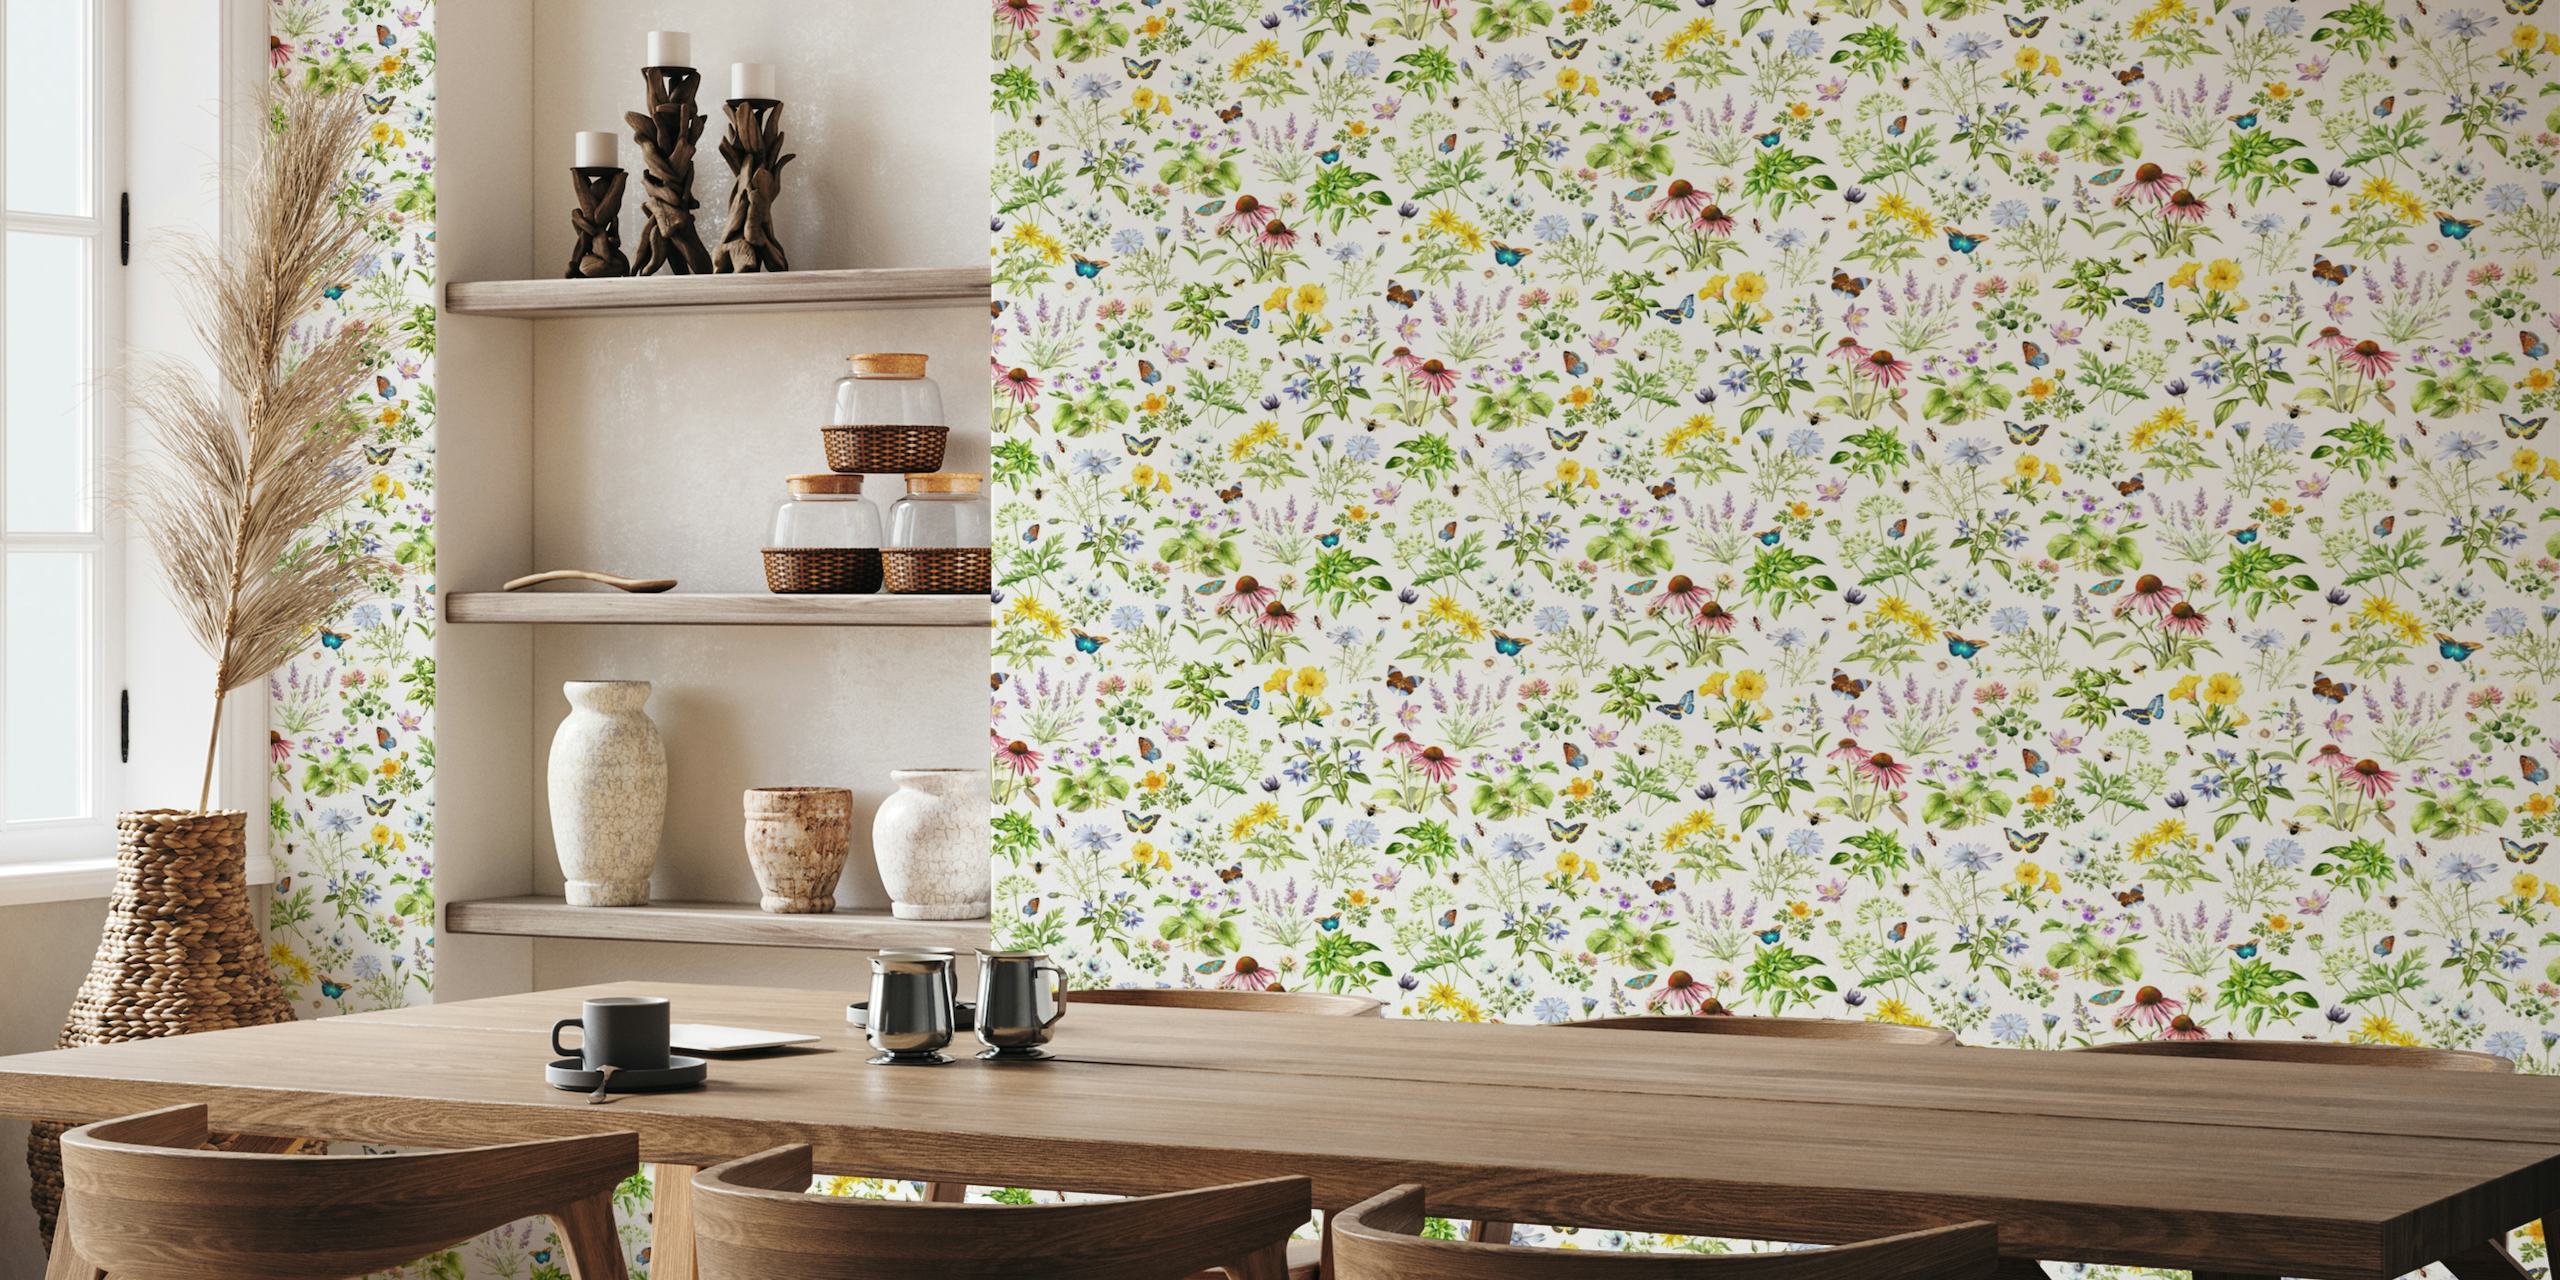 Wall mural featuring herbs, butterflies, and wildflowers on a bright background